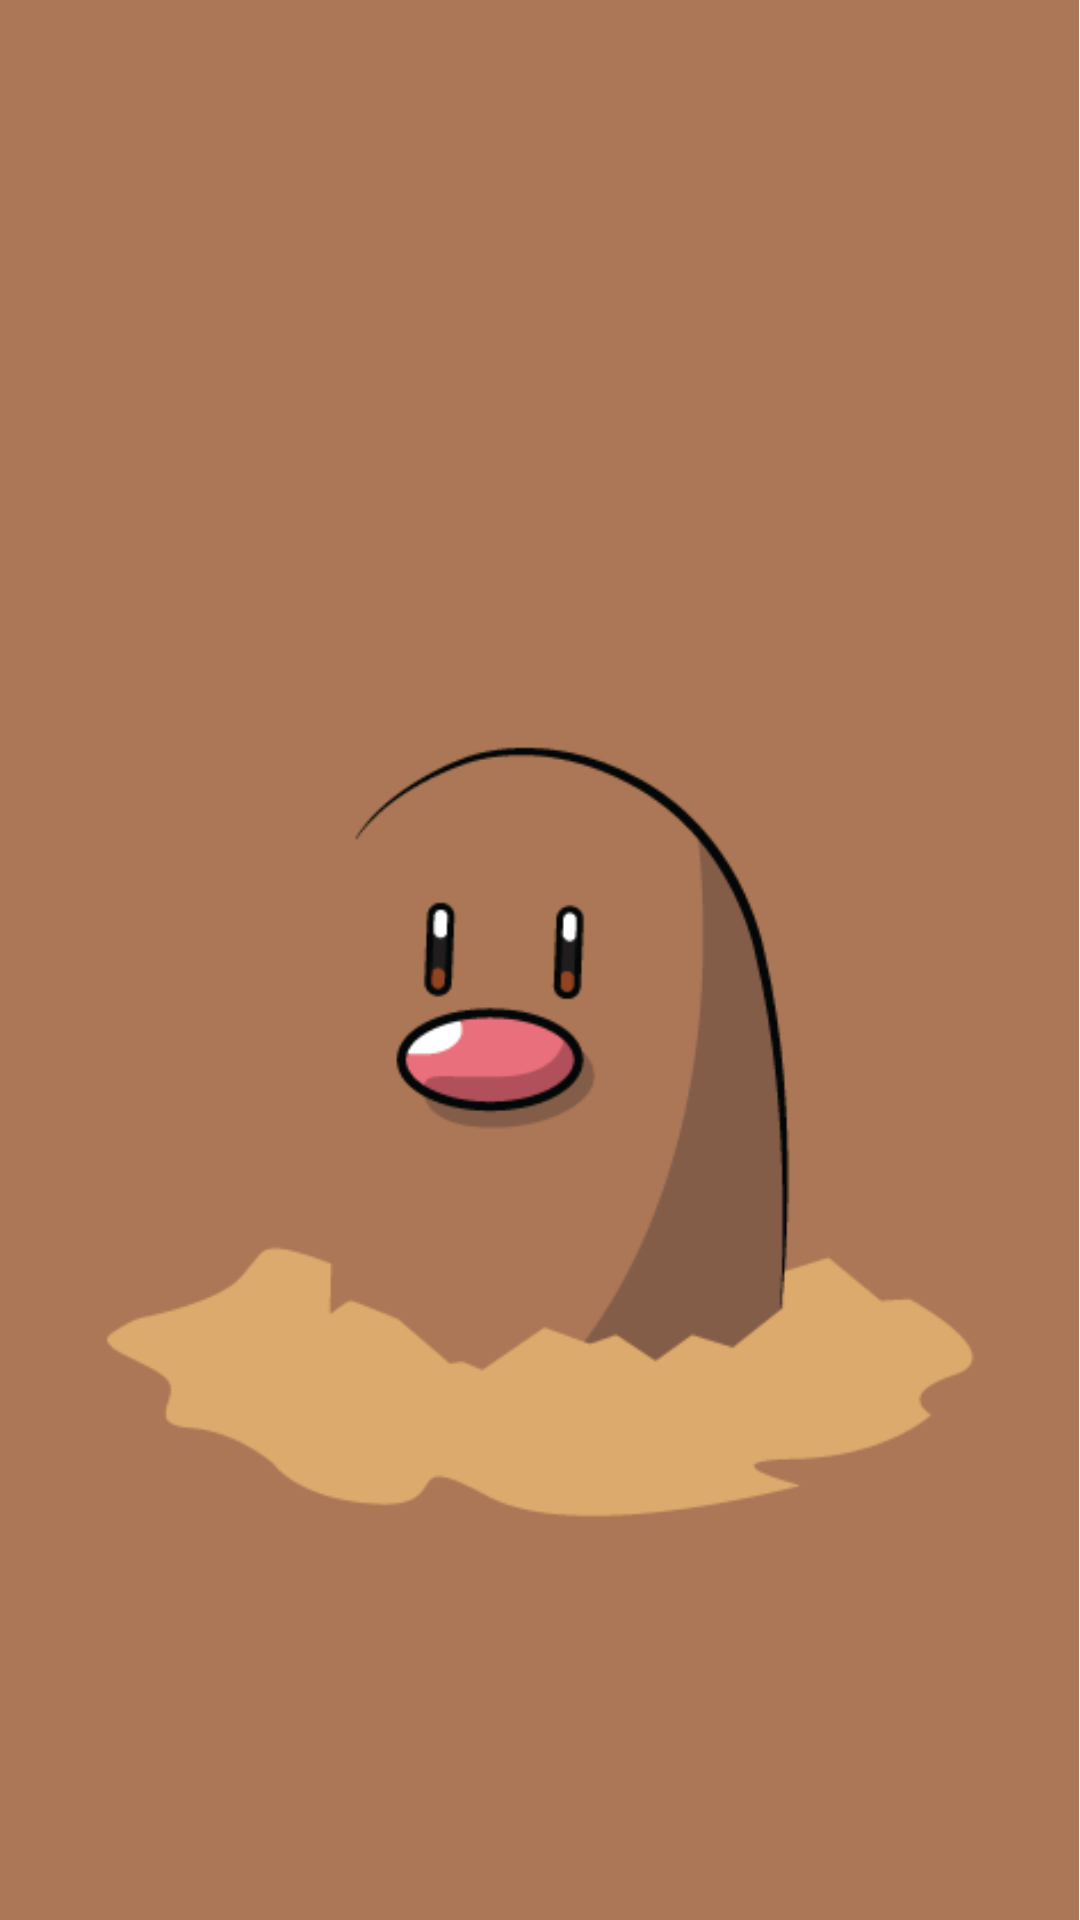 Diglett Tap To See More Pokemon Go iPhone Wallpaper